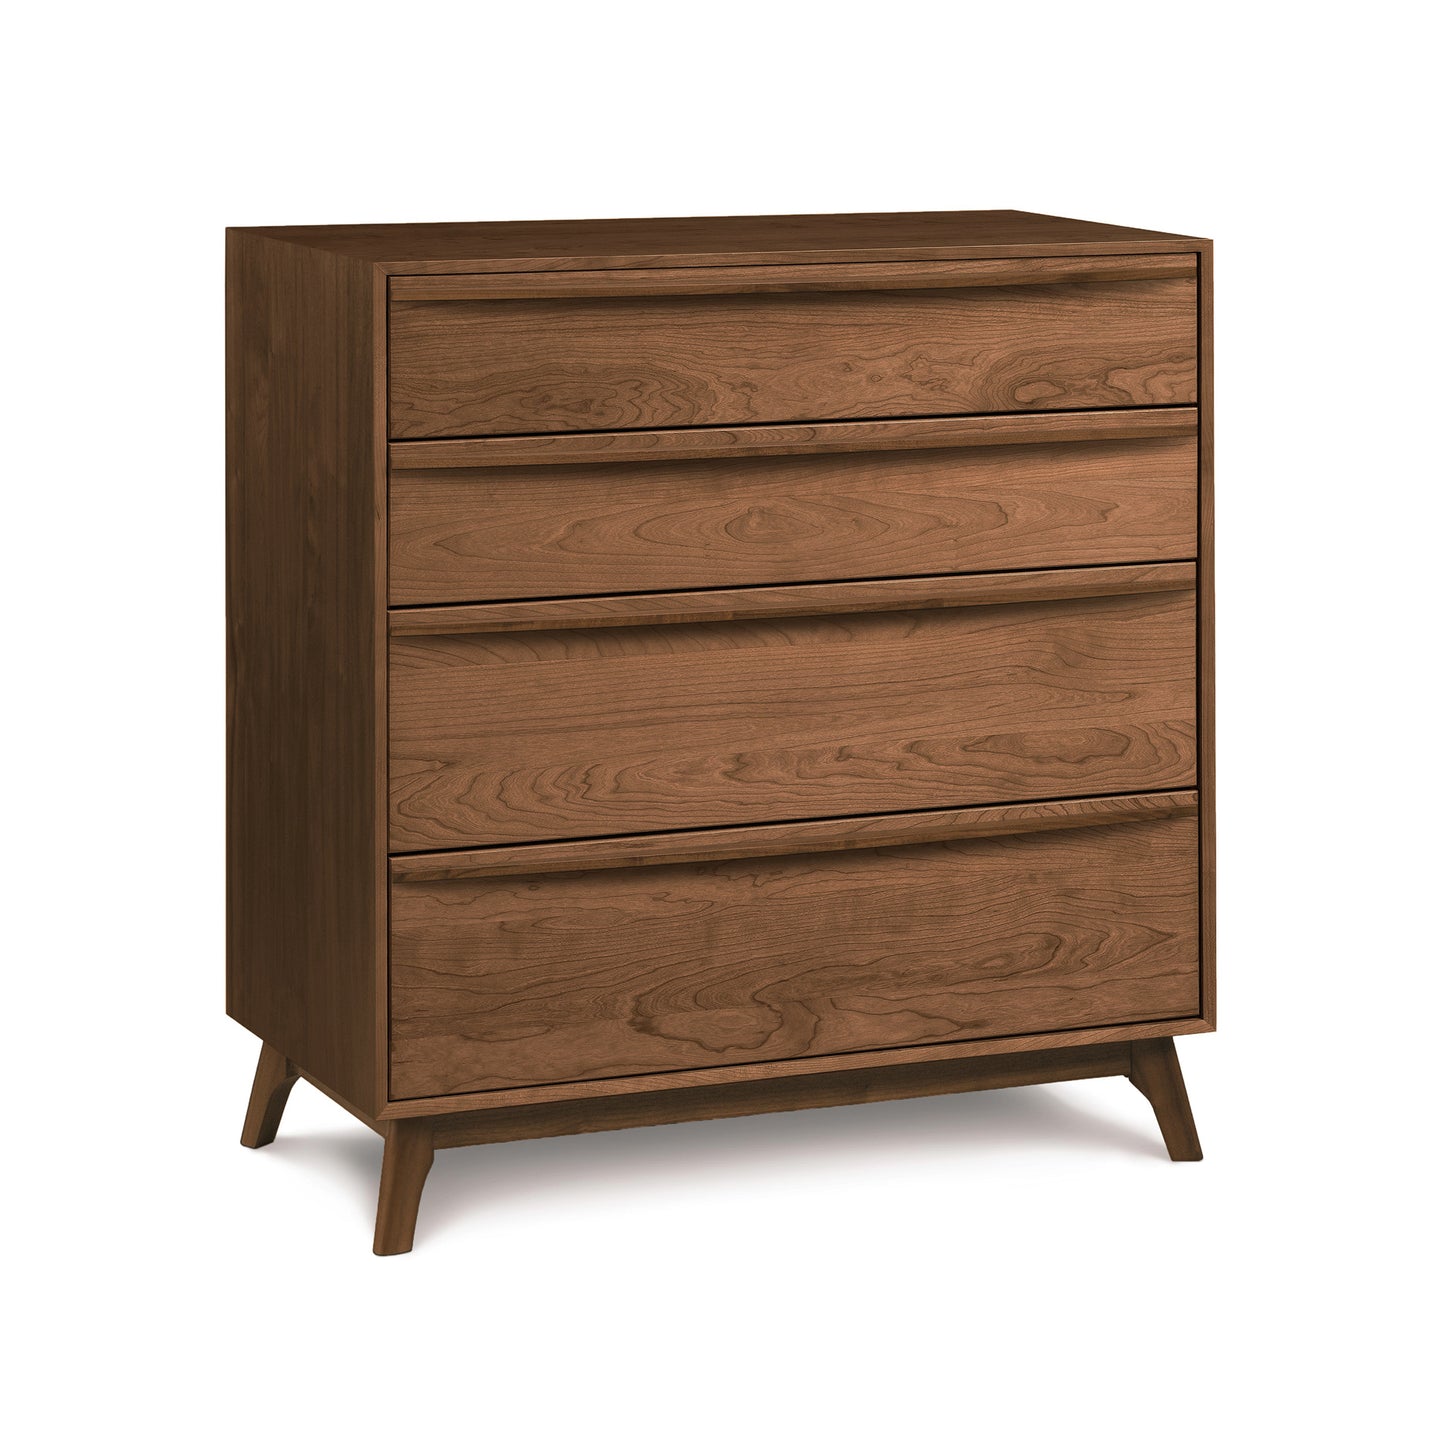 A Copeland Furniture Catalina 4-Drawer Chest, handmade in Vermont, showcasing its modern bedroom appeal.